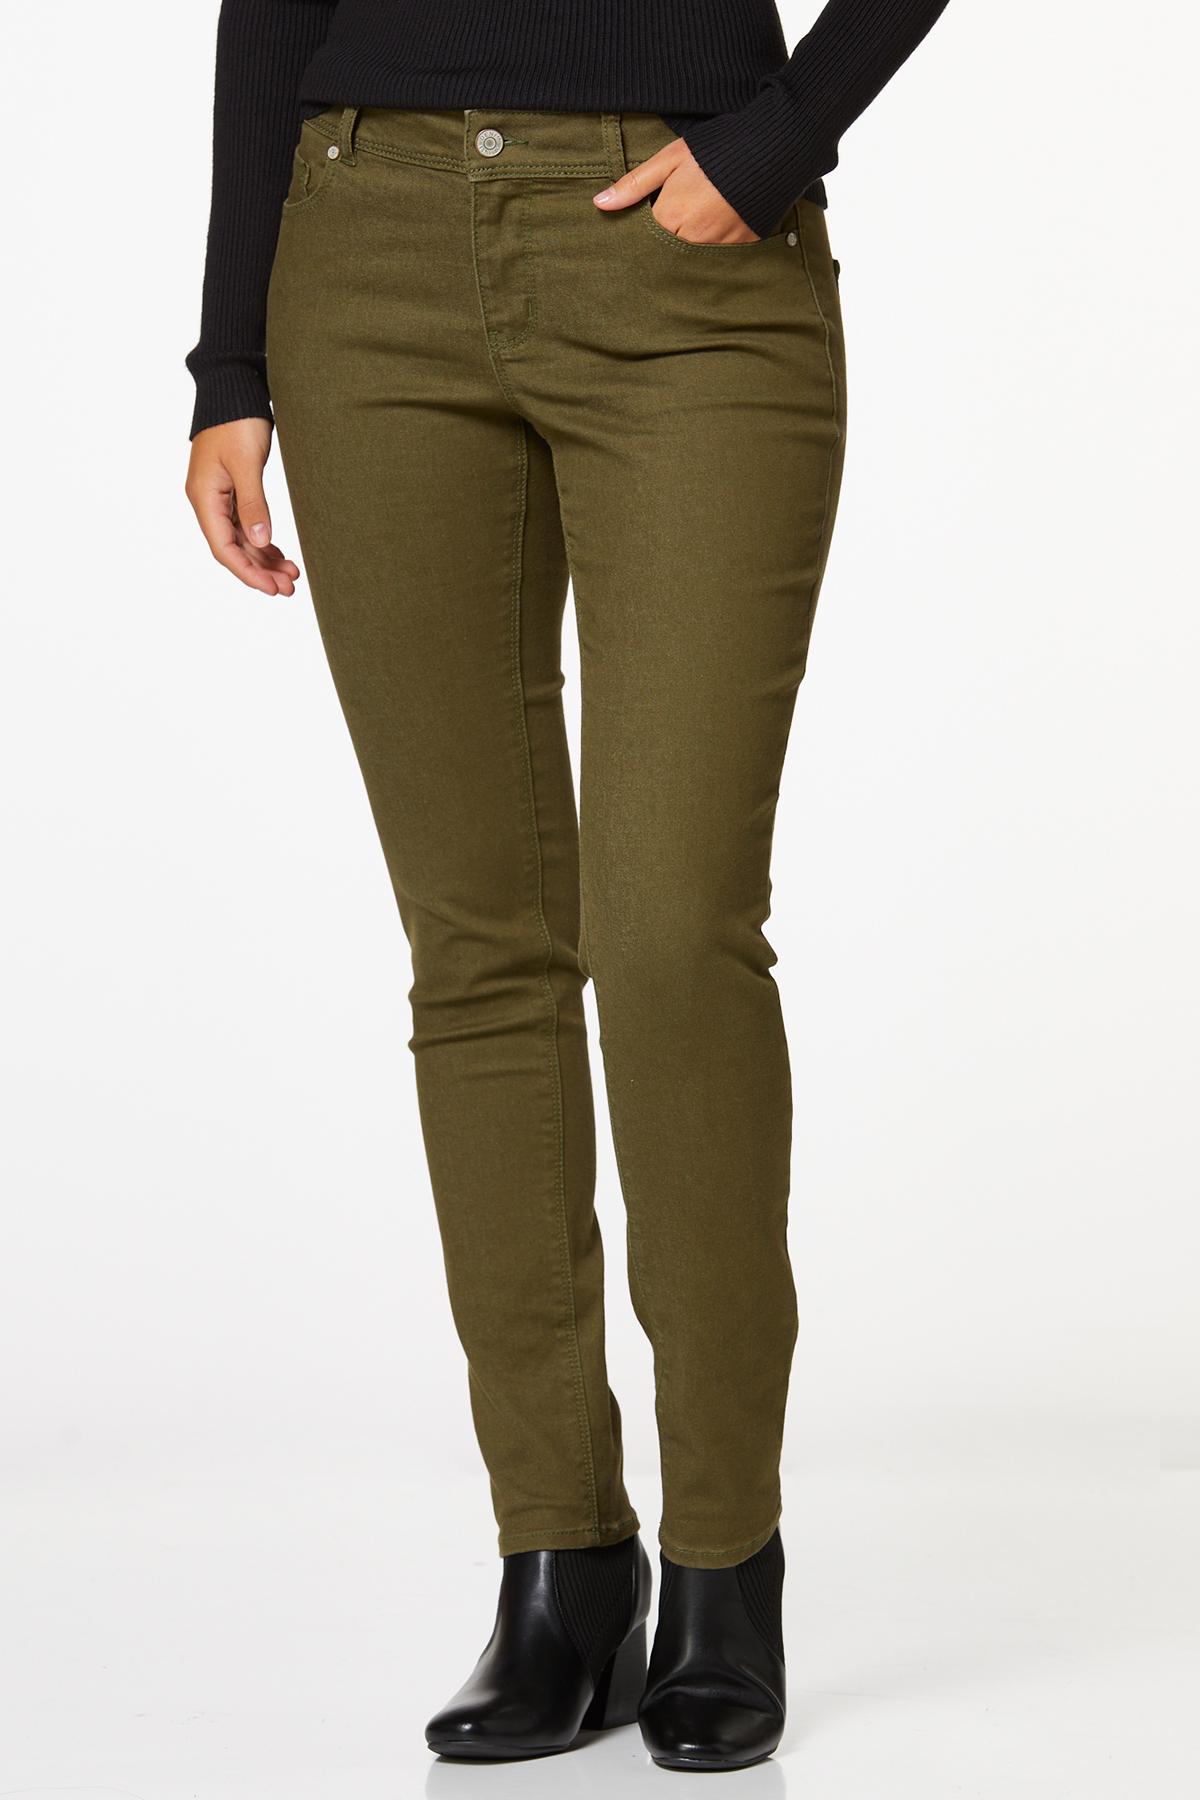 Petite Colored Skinny Jeans